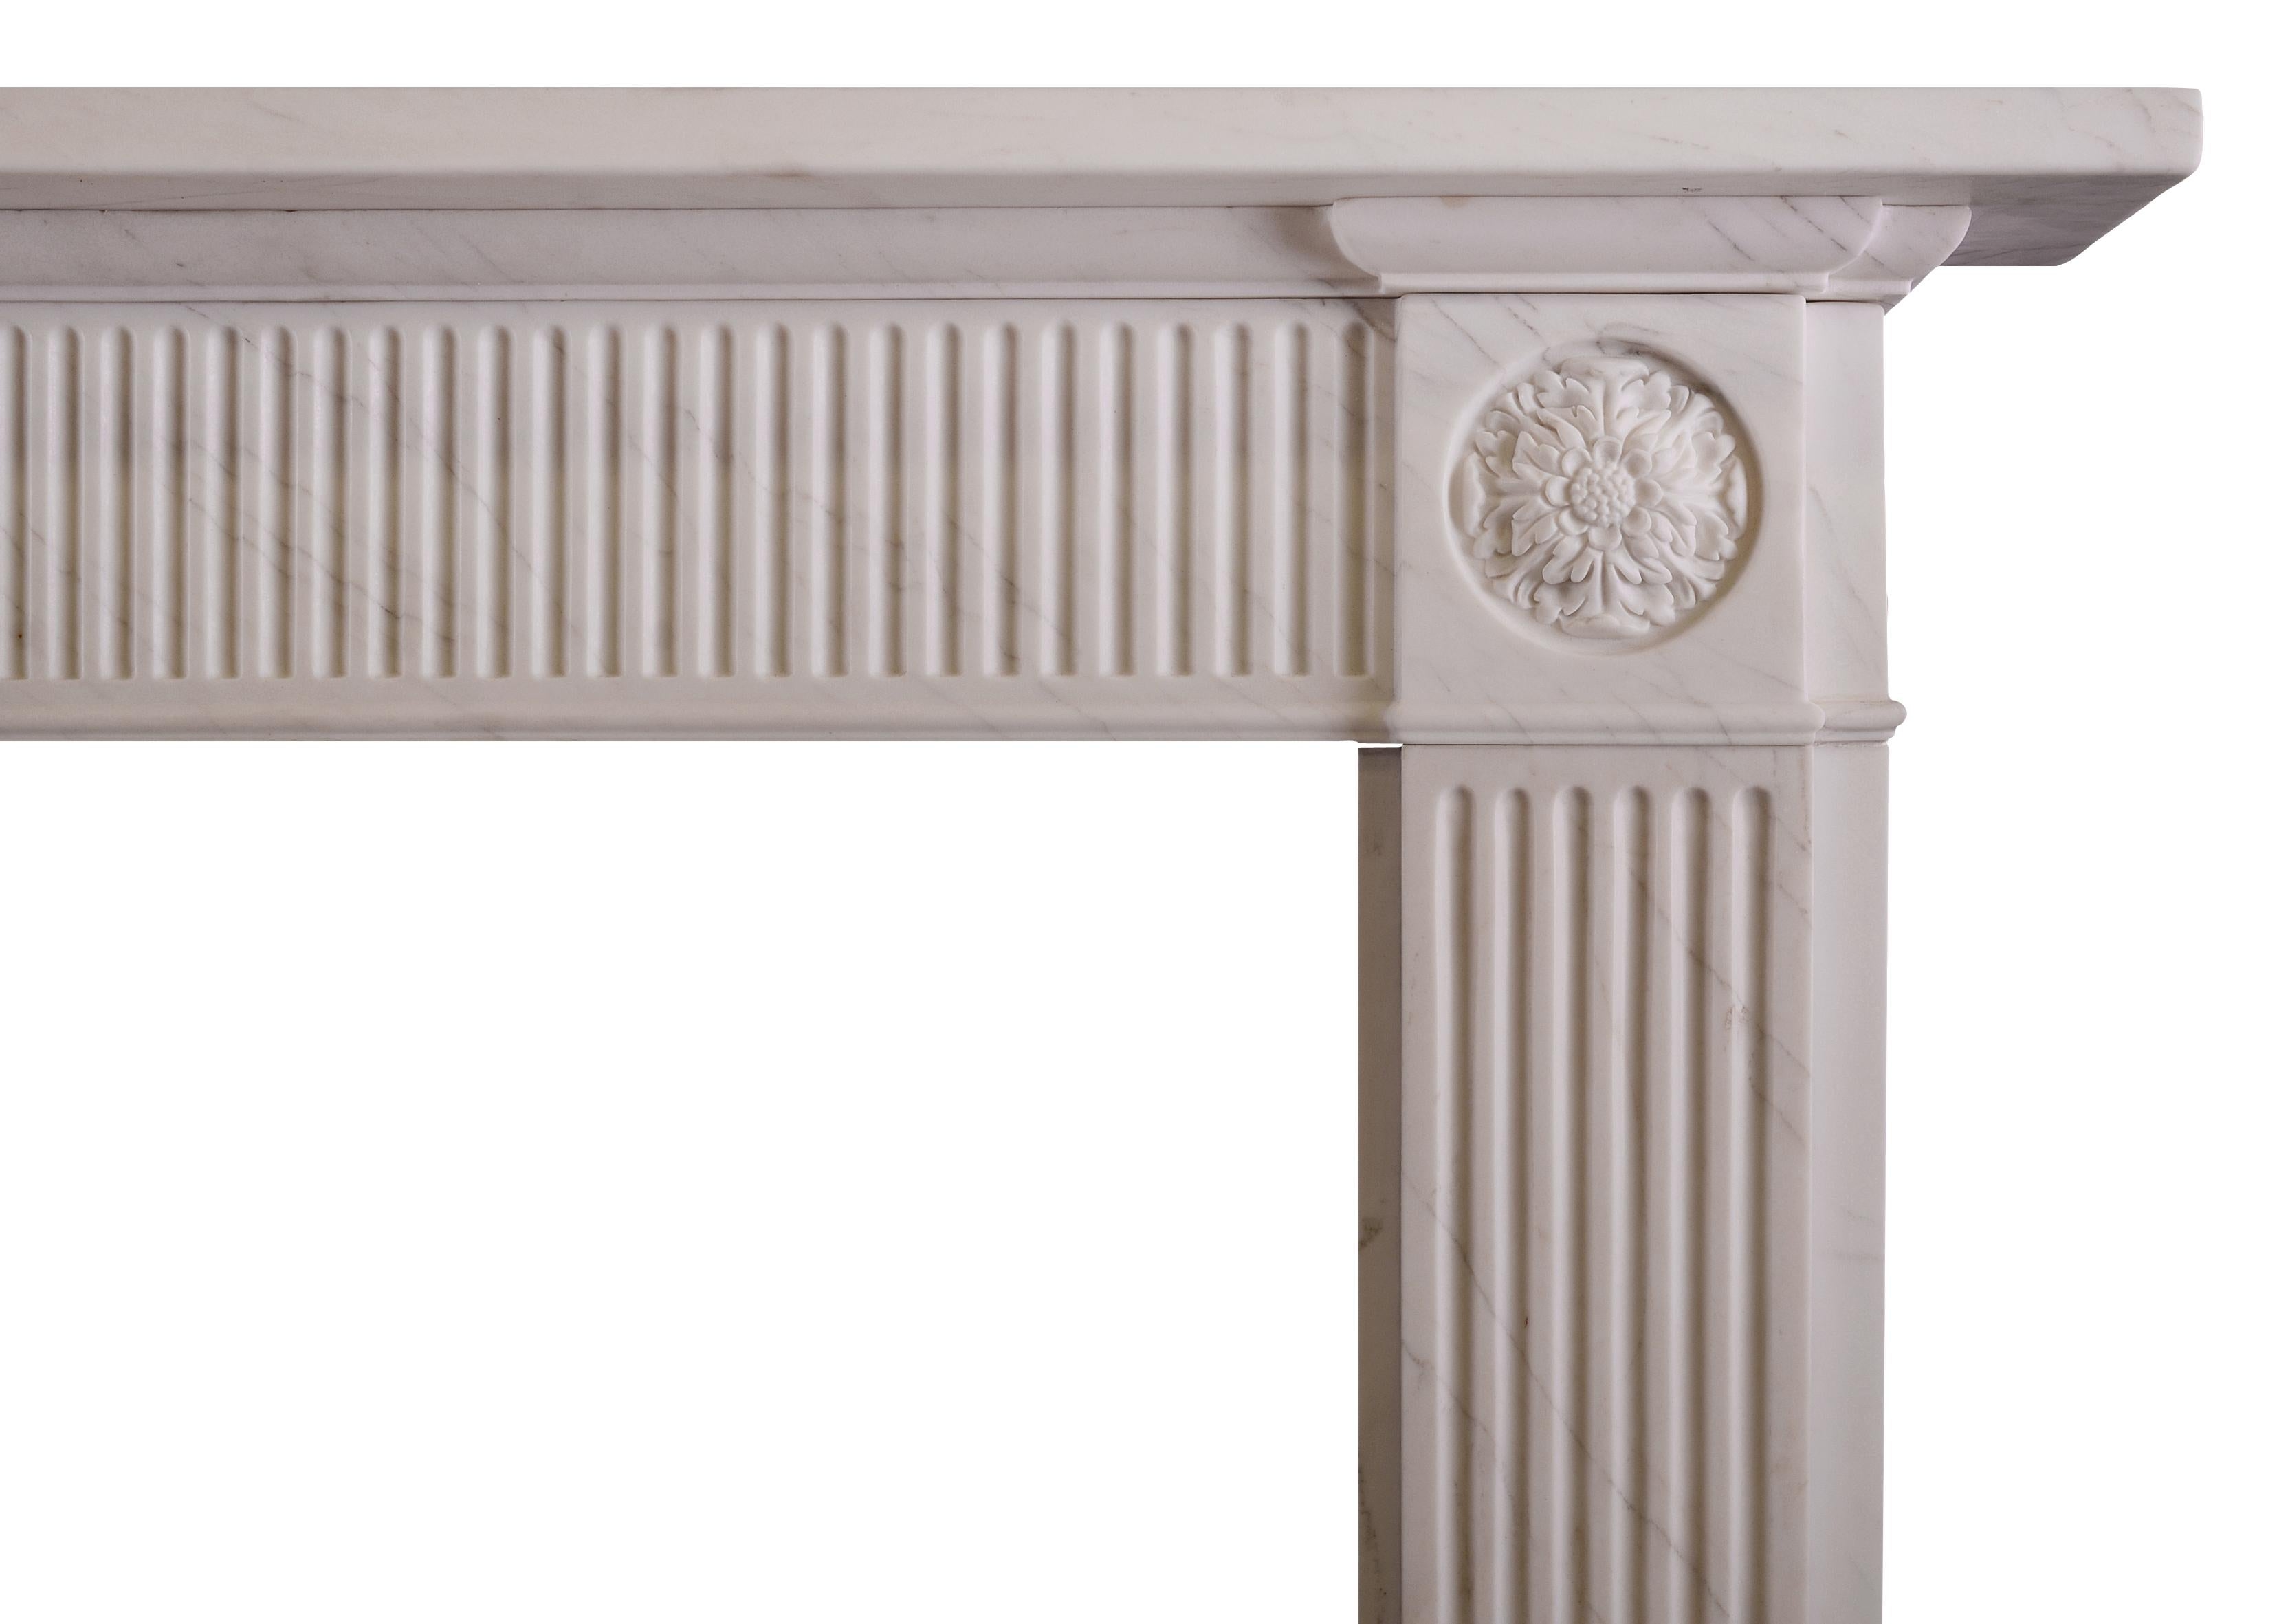 A simple yet elegant white marble fireplace in the Regency style. The fluted jambs surmounted by carved rosette paterae above. The frieze with flutes throughout. Moulded shelf above. English, modern.


Shelf width: 1534 mm / 60 5/8 in
Overall